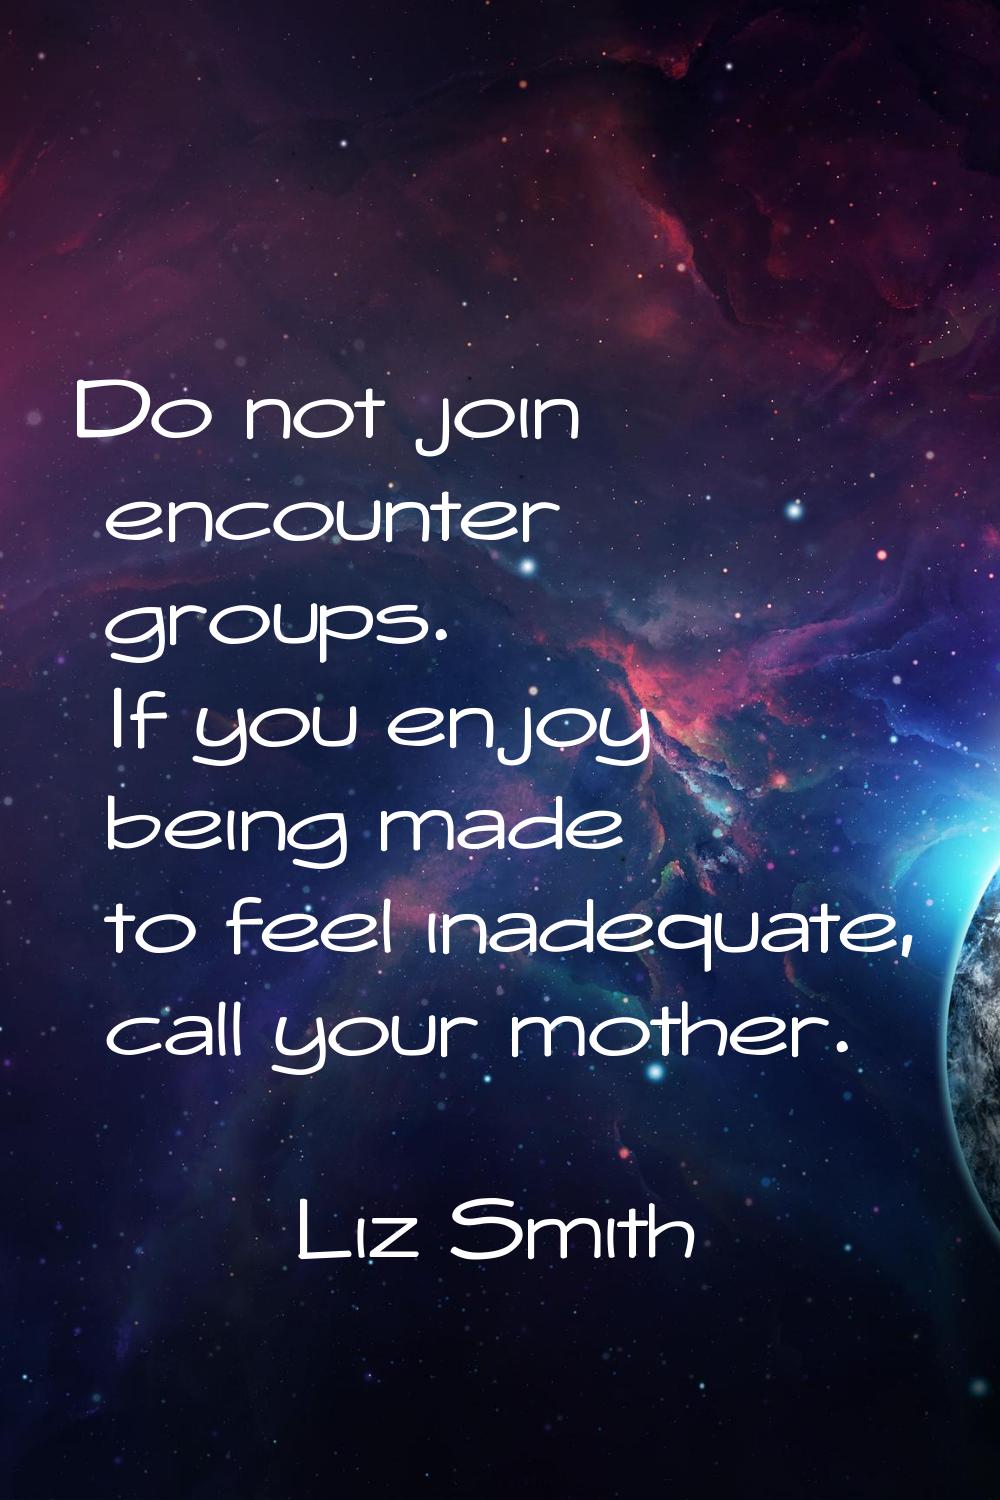 Do not join encounter groups. If you enjoy being made to feel inadequate, call your mother.